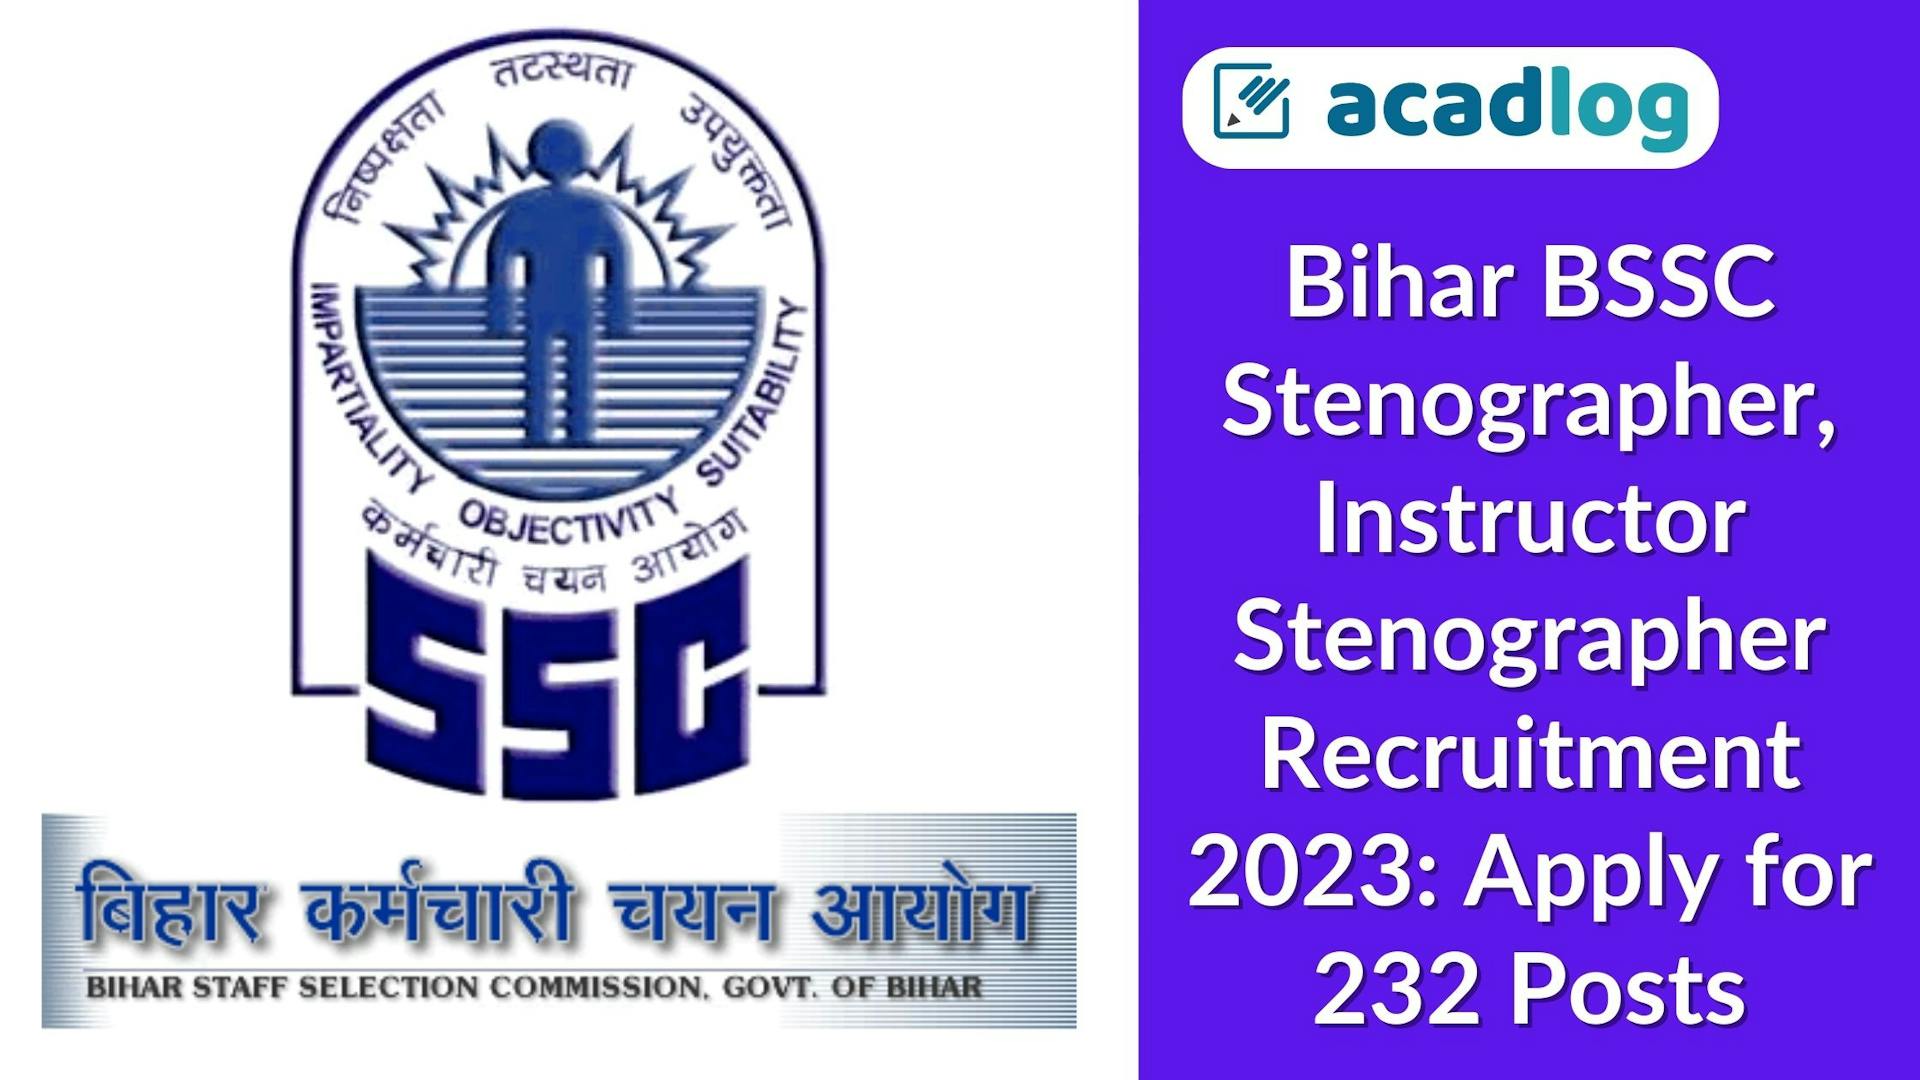 BSSC Stenographer, Instructor Stenographer Recruitment 2023: Apply for 232 Posts